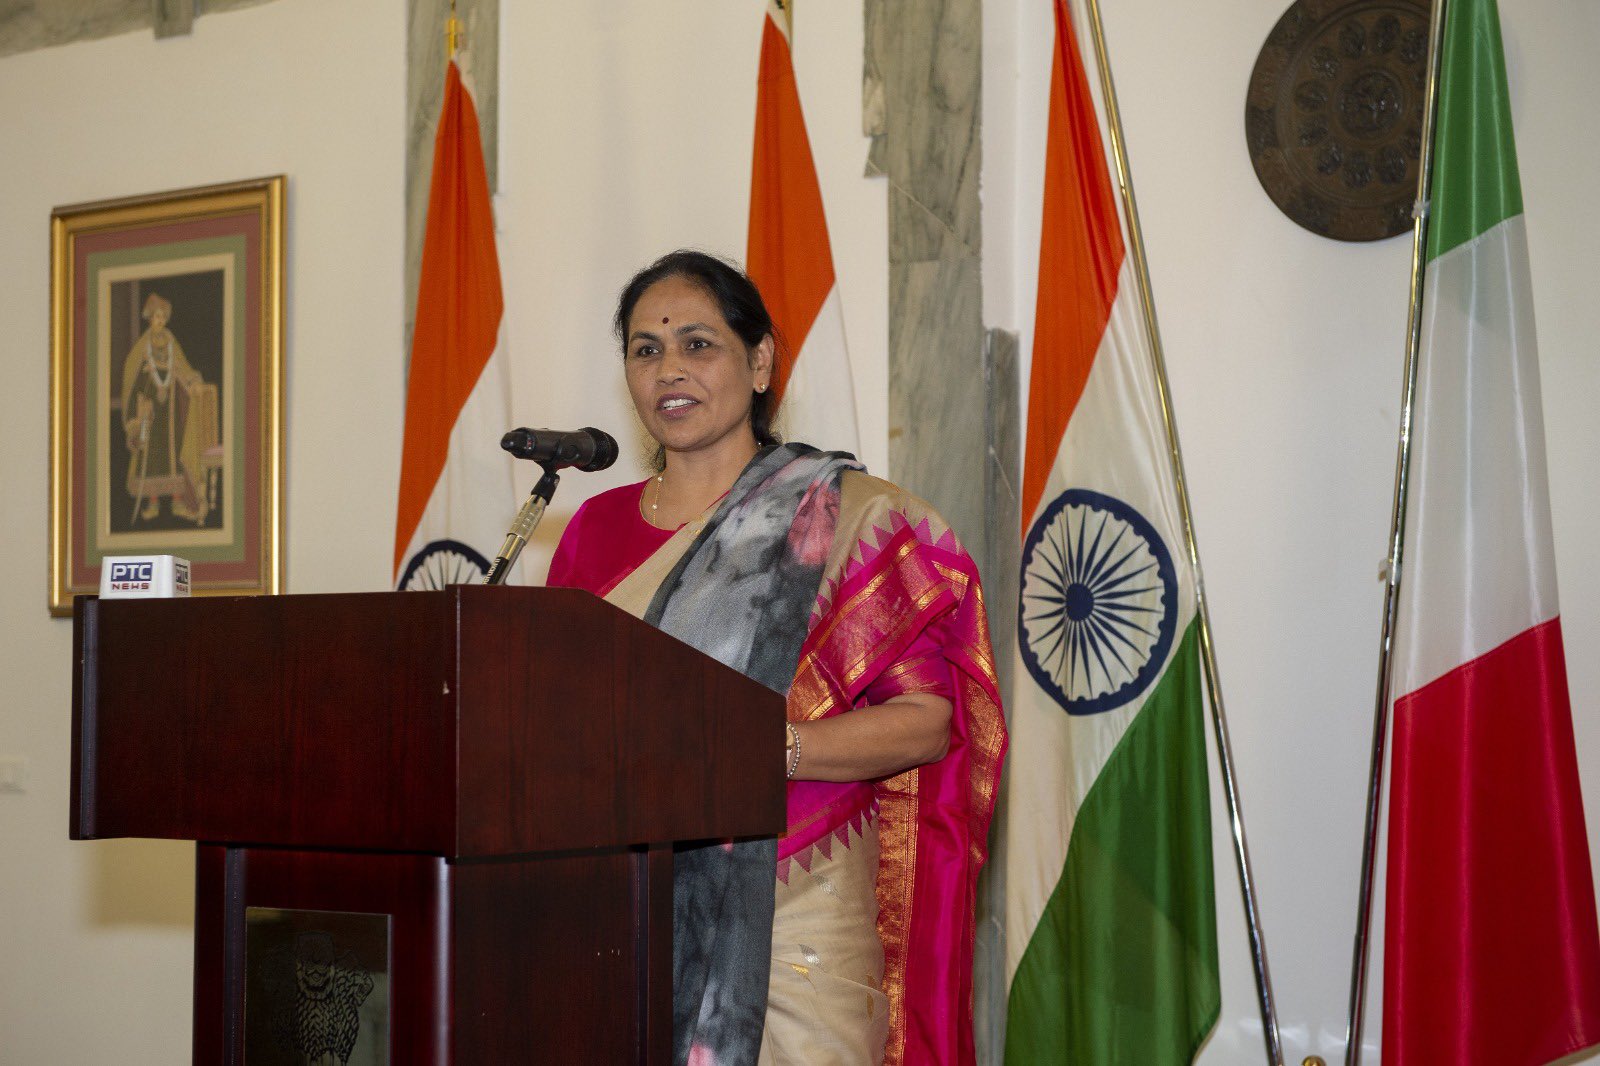 Reception hosted in honour of MoS Agriculture Hon'ble Shobha Karandlaje at the Embassy of India